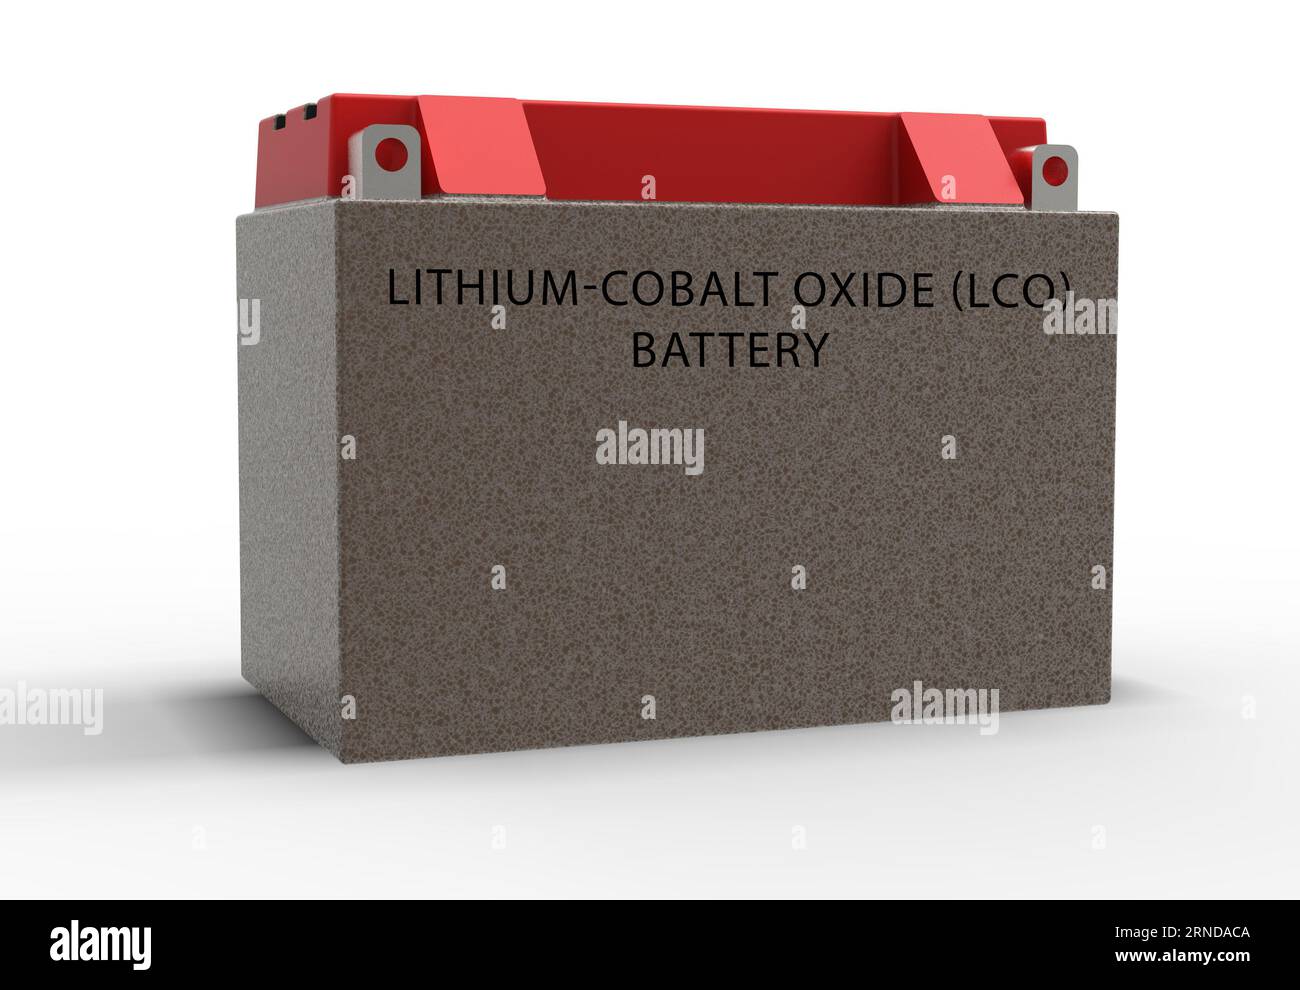 Lithium-cobalt oxide (LCO) Battery LCO batteries are a type of rechargeable  battery used in portable electronics like smartphones and laptops. They ha  Stock Photo - Alamy